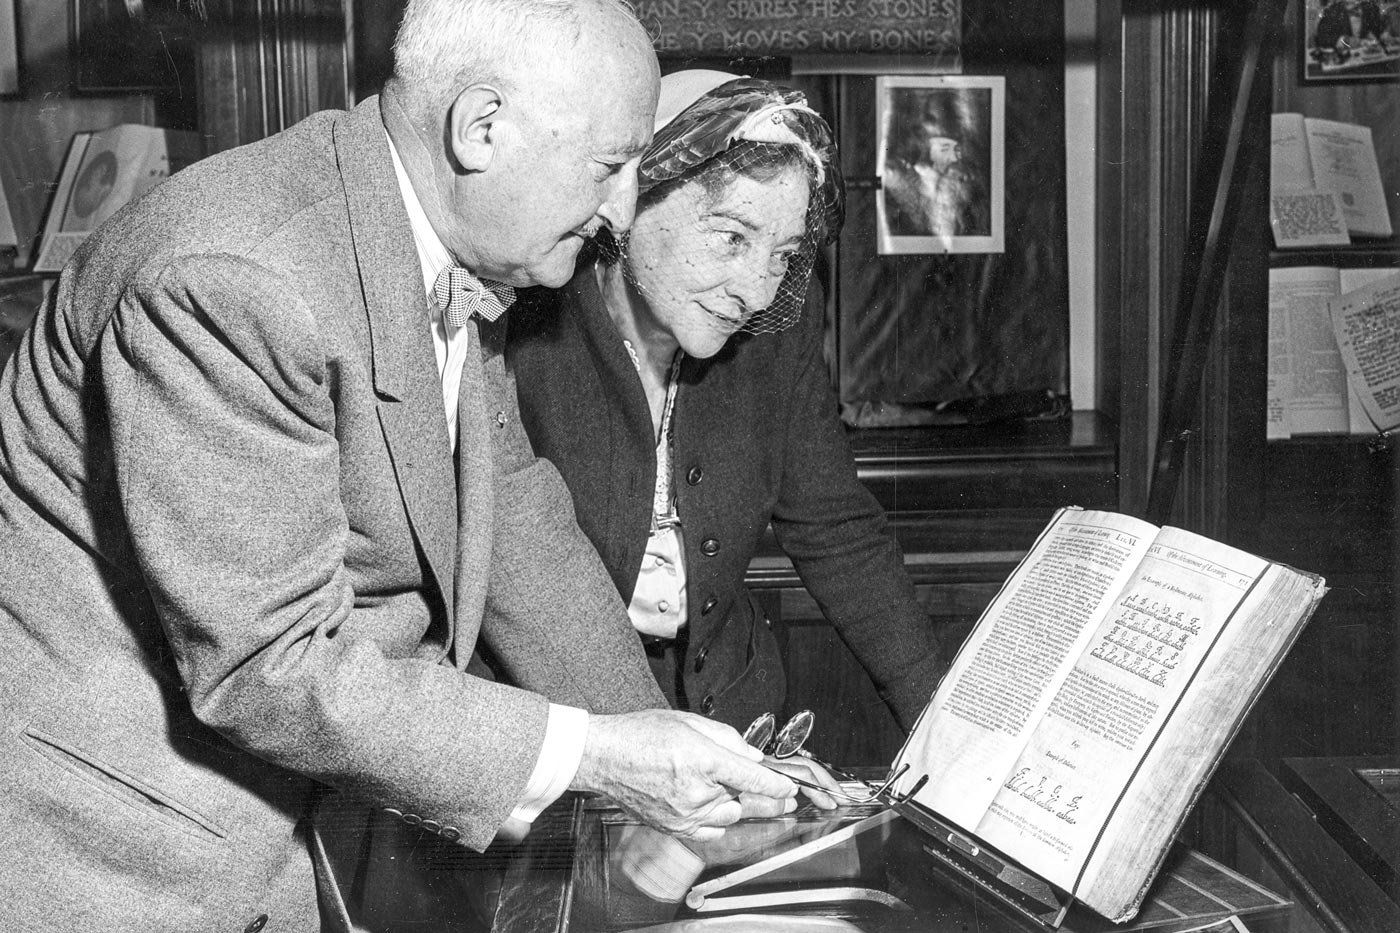 Elizebeth and William Friedman at Peabody Institute Library on tour for their book, “The Shakespearean Ciphers Examined.” 1960. Credit: George C Marshall Foundation Library